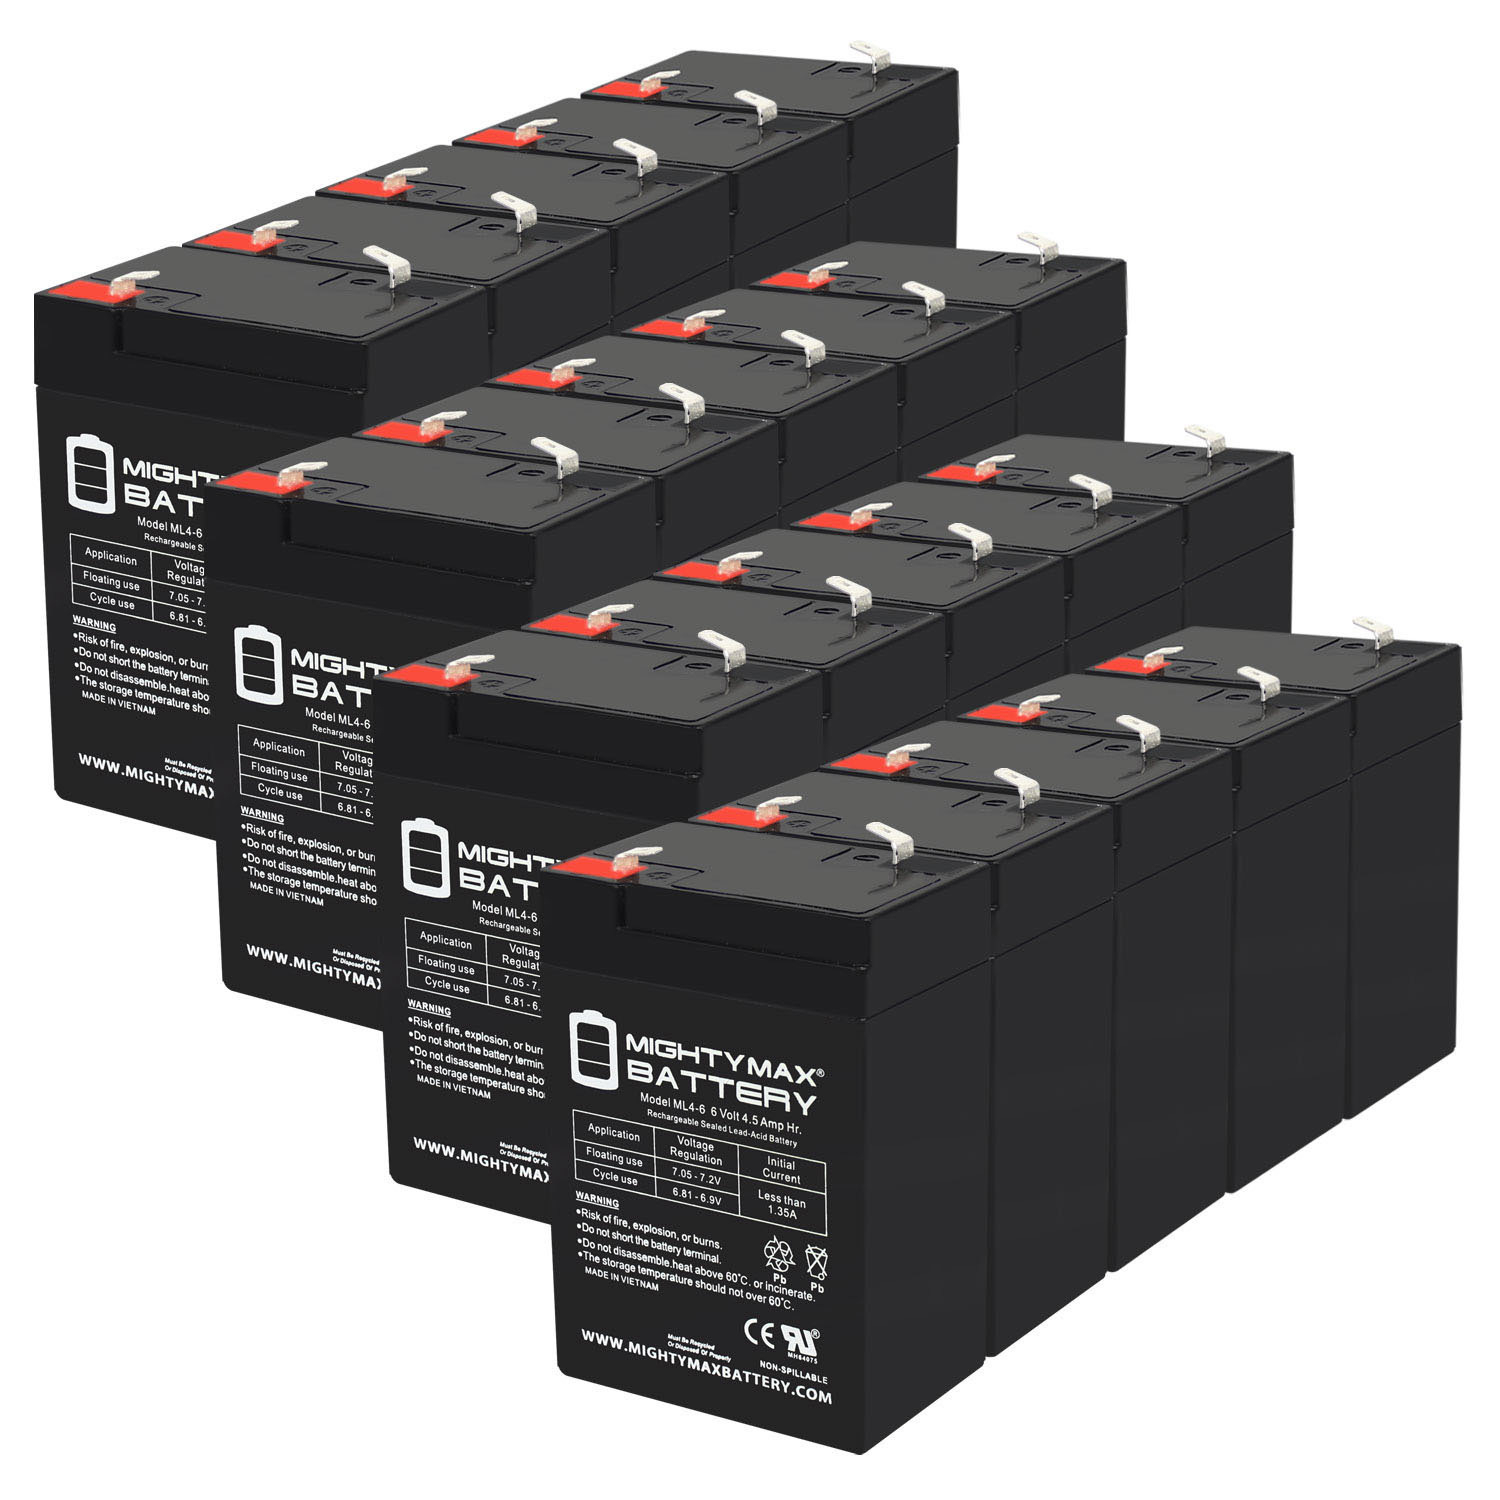 6V 4.5AH SLA Replacement Battery for Dual-Lite LTUGB - 20 Pack